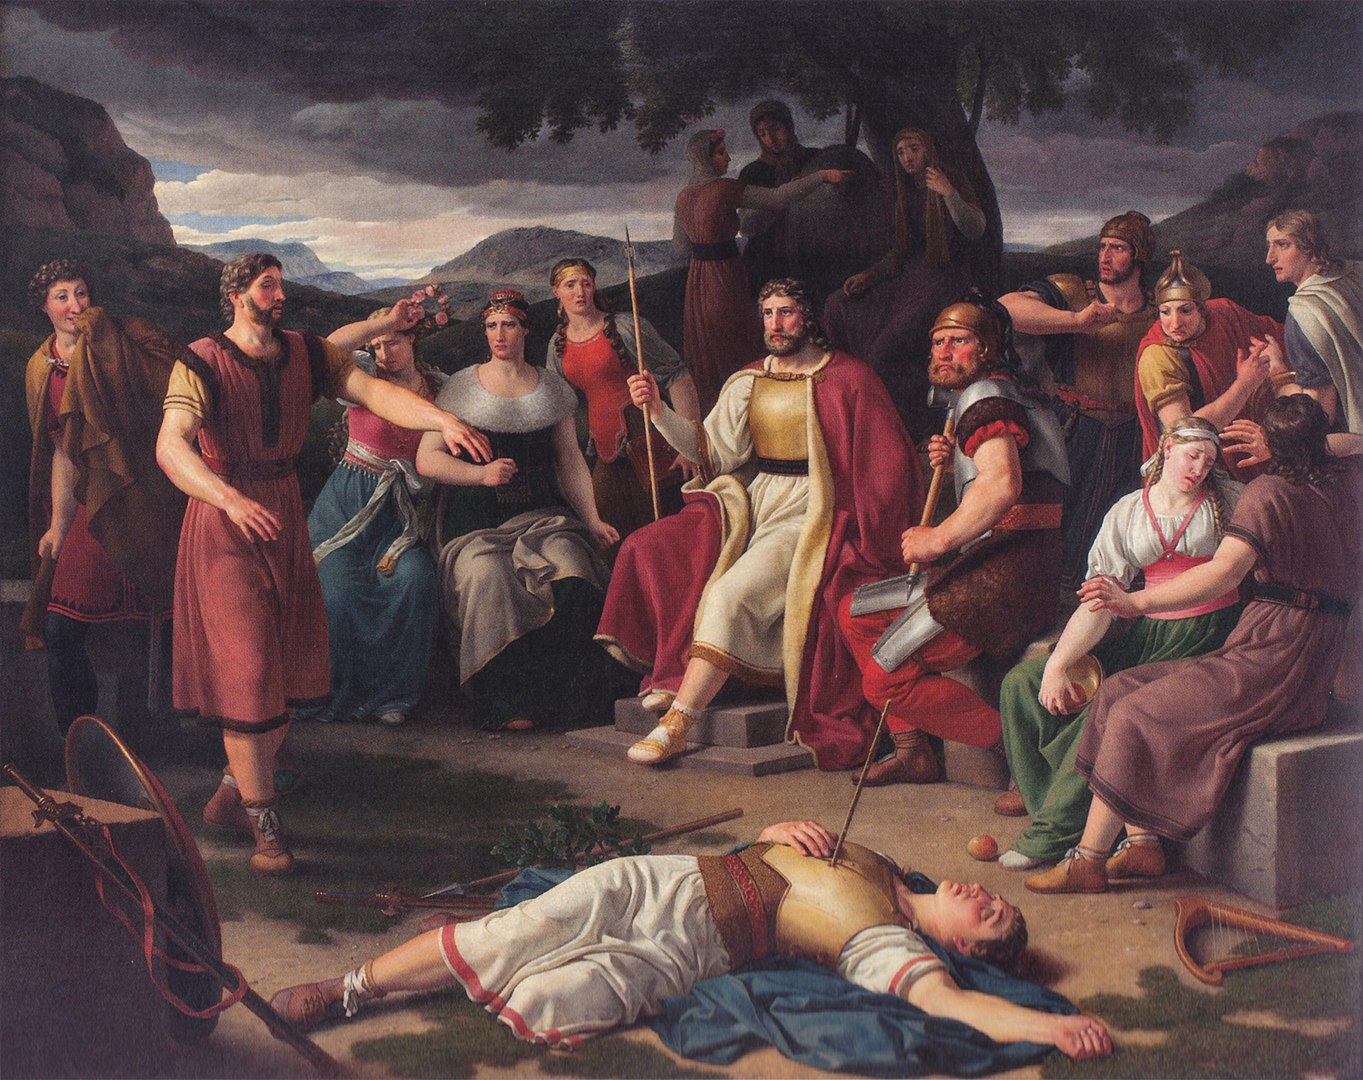 A deceased man with an arrow pierced to his chest lying on the ground surrounded by mournful figures